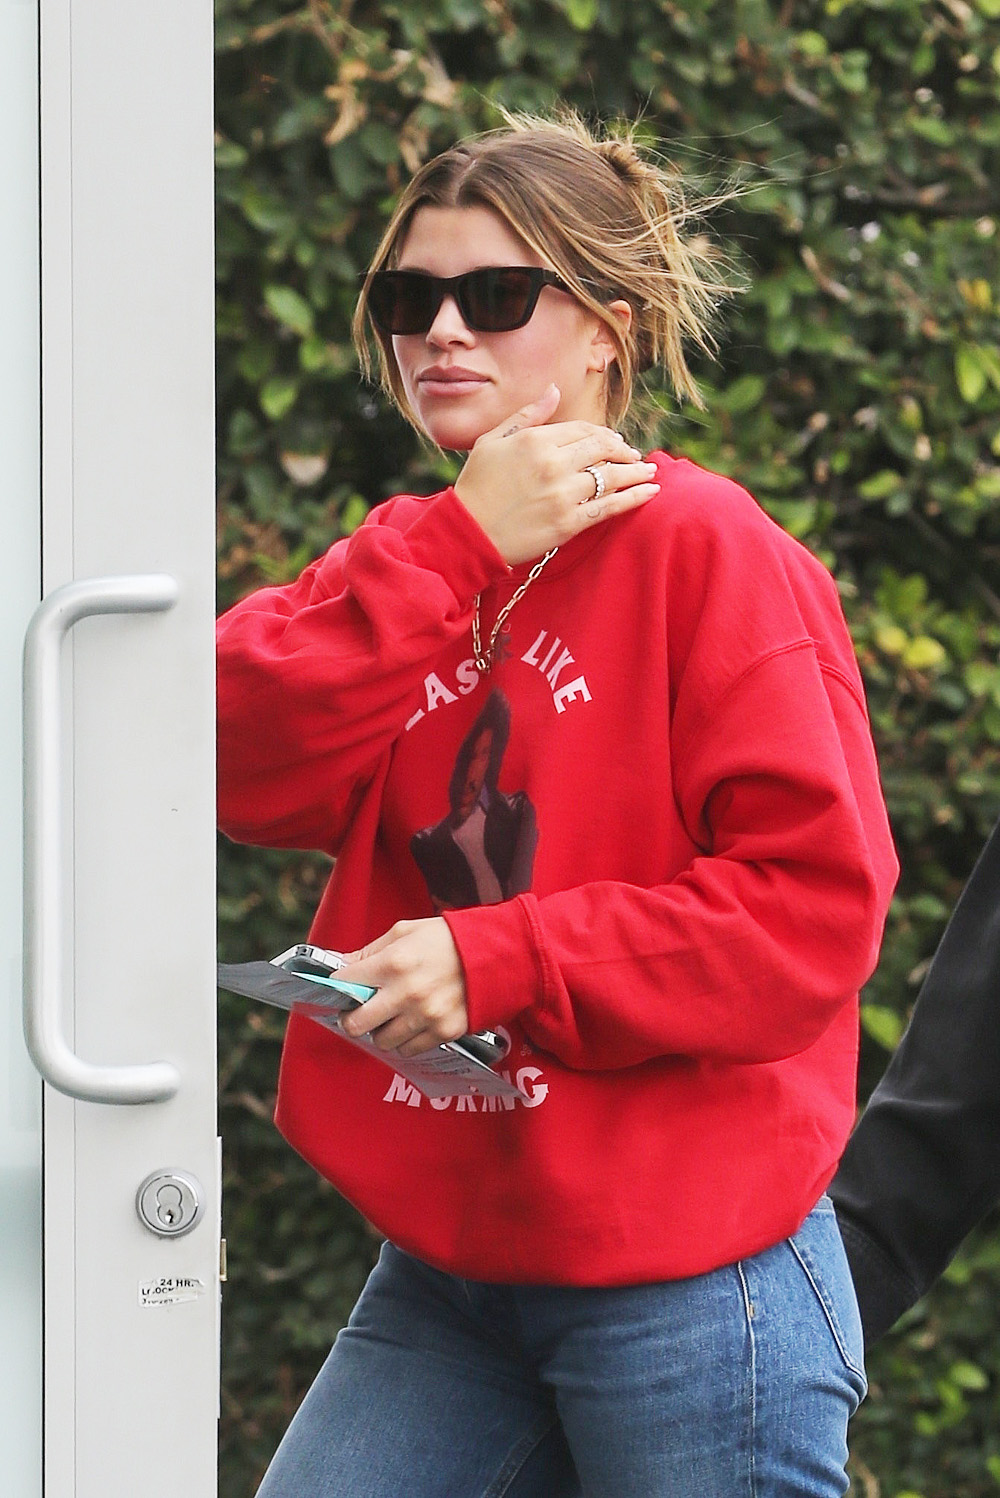 Hilary Duff in jeans and knit sweater on December 8 ~ I want her